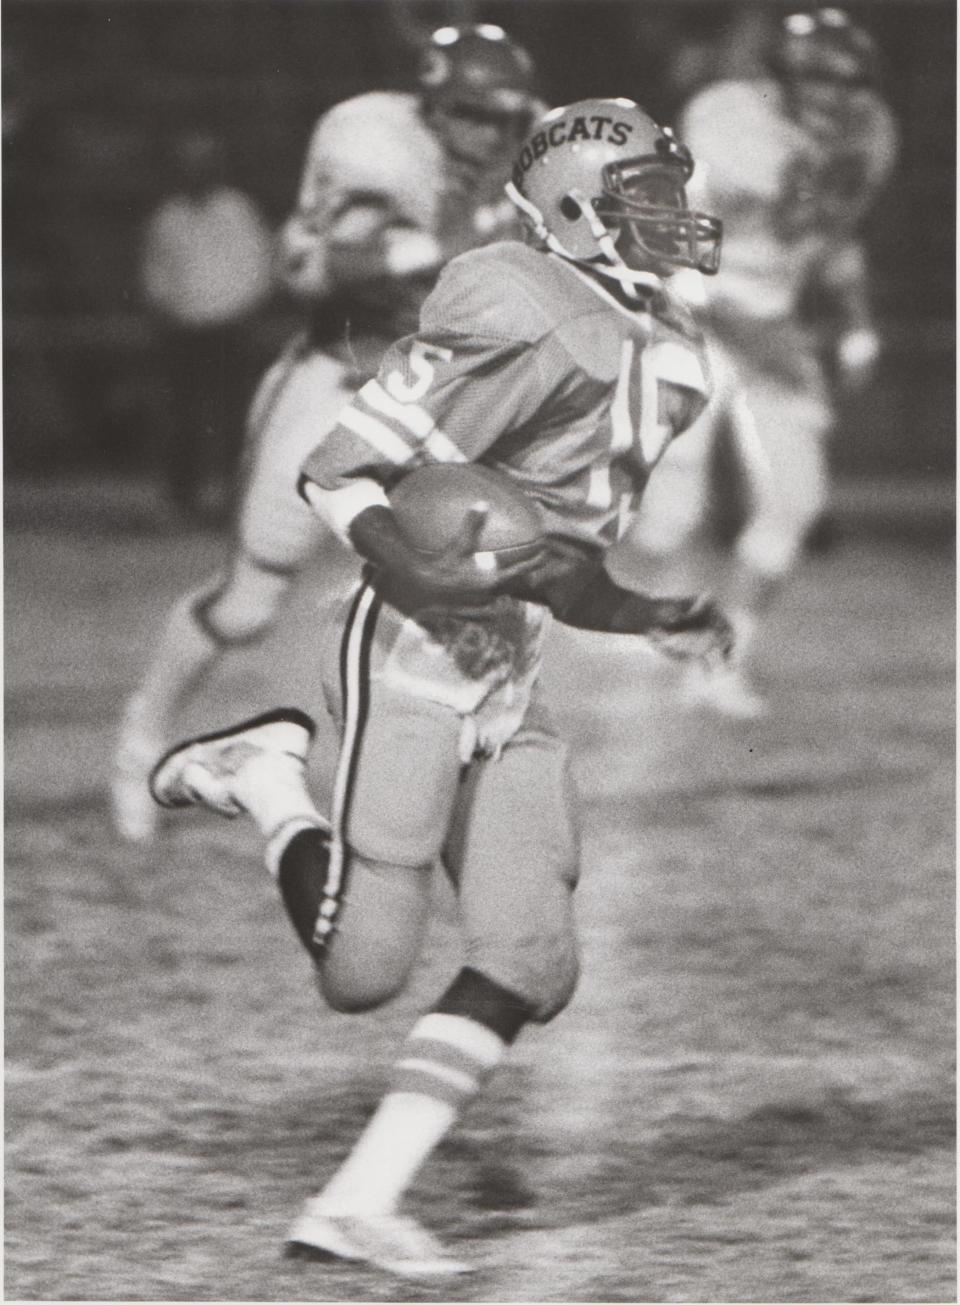 Greg Thomas, a 1984 San Angelo Central graduate, became the first black quarterback at Central and at the University of Arkansas. He is the son of Allie Thomas, who coached the San Angelo Blackshear football team to a state title in 1950.